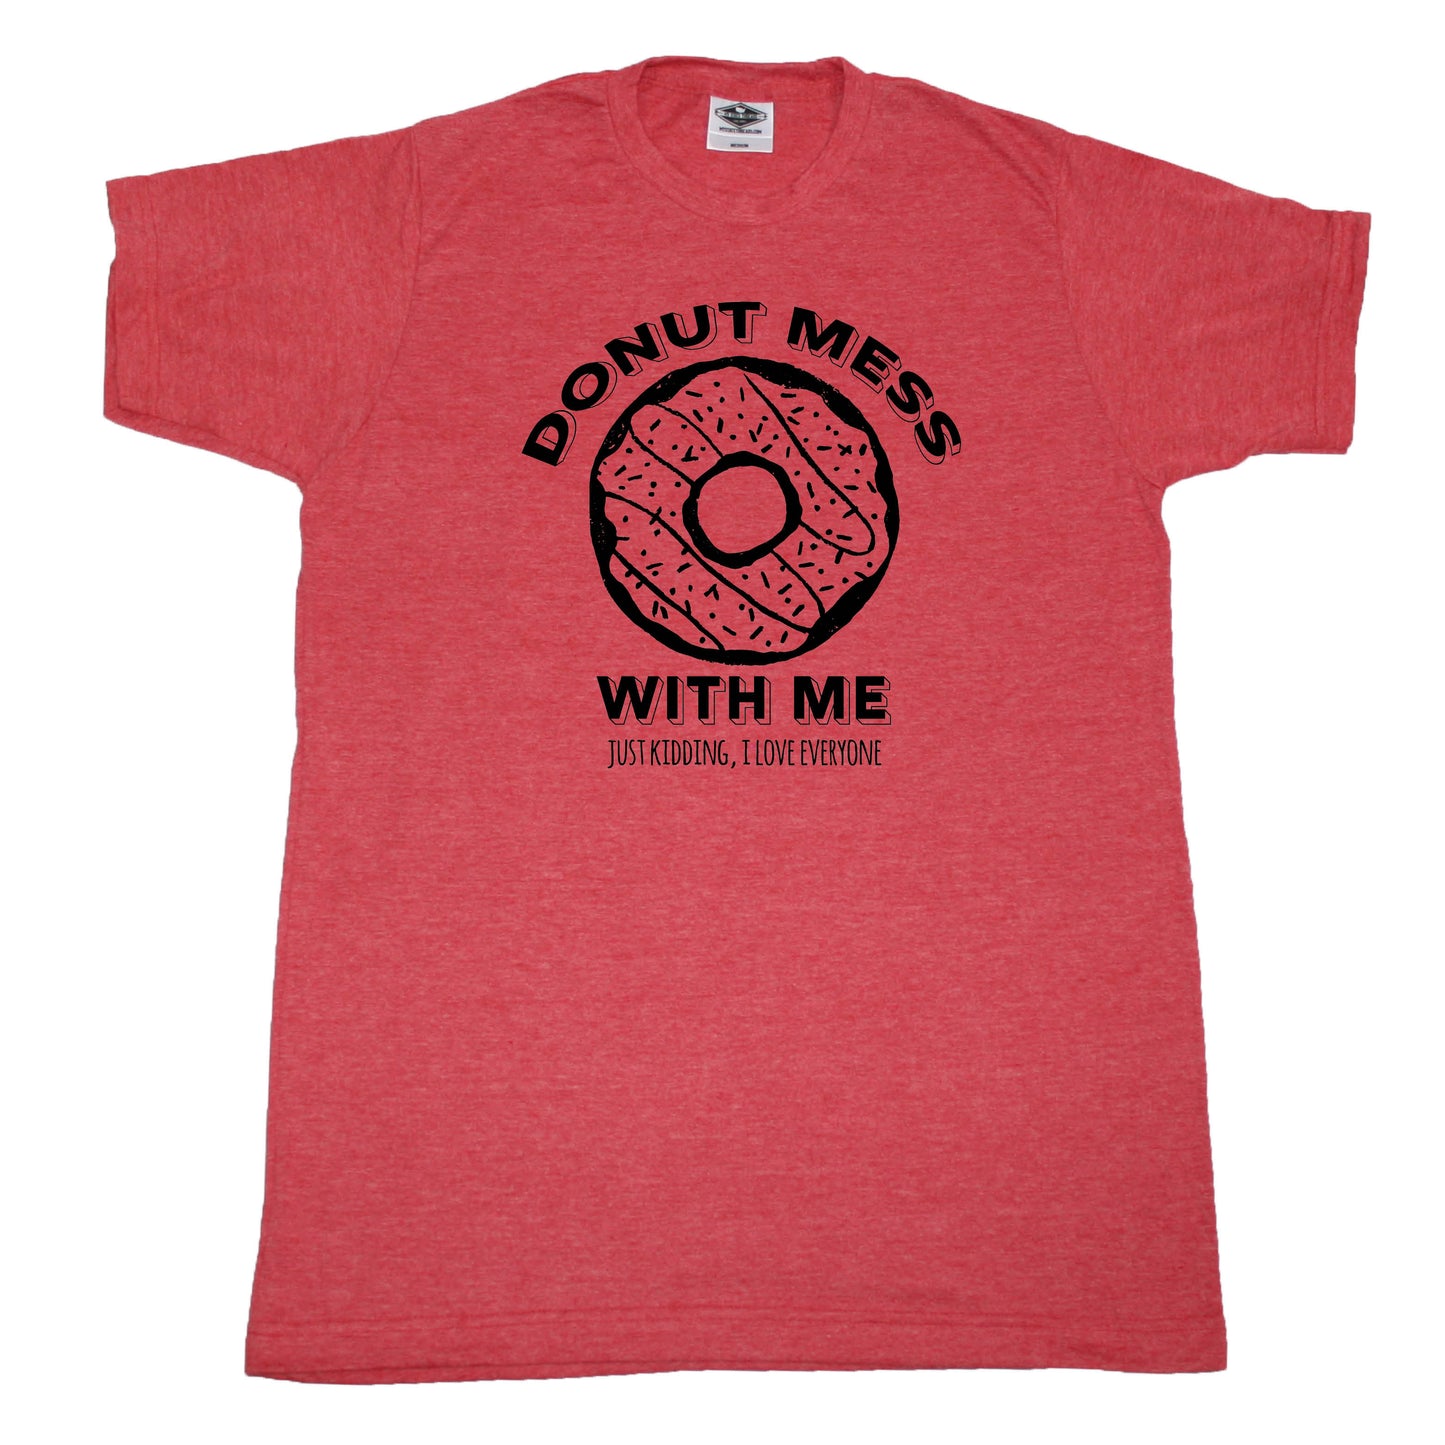 Donut Mess With Me - Unisex Tee